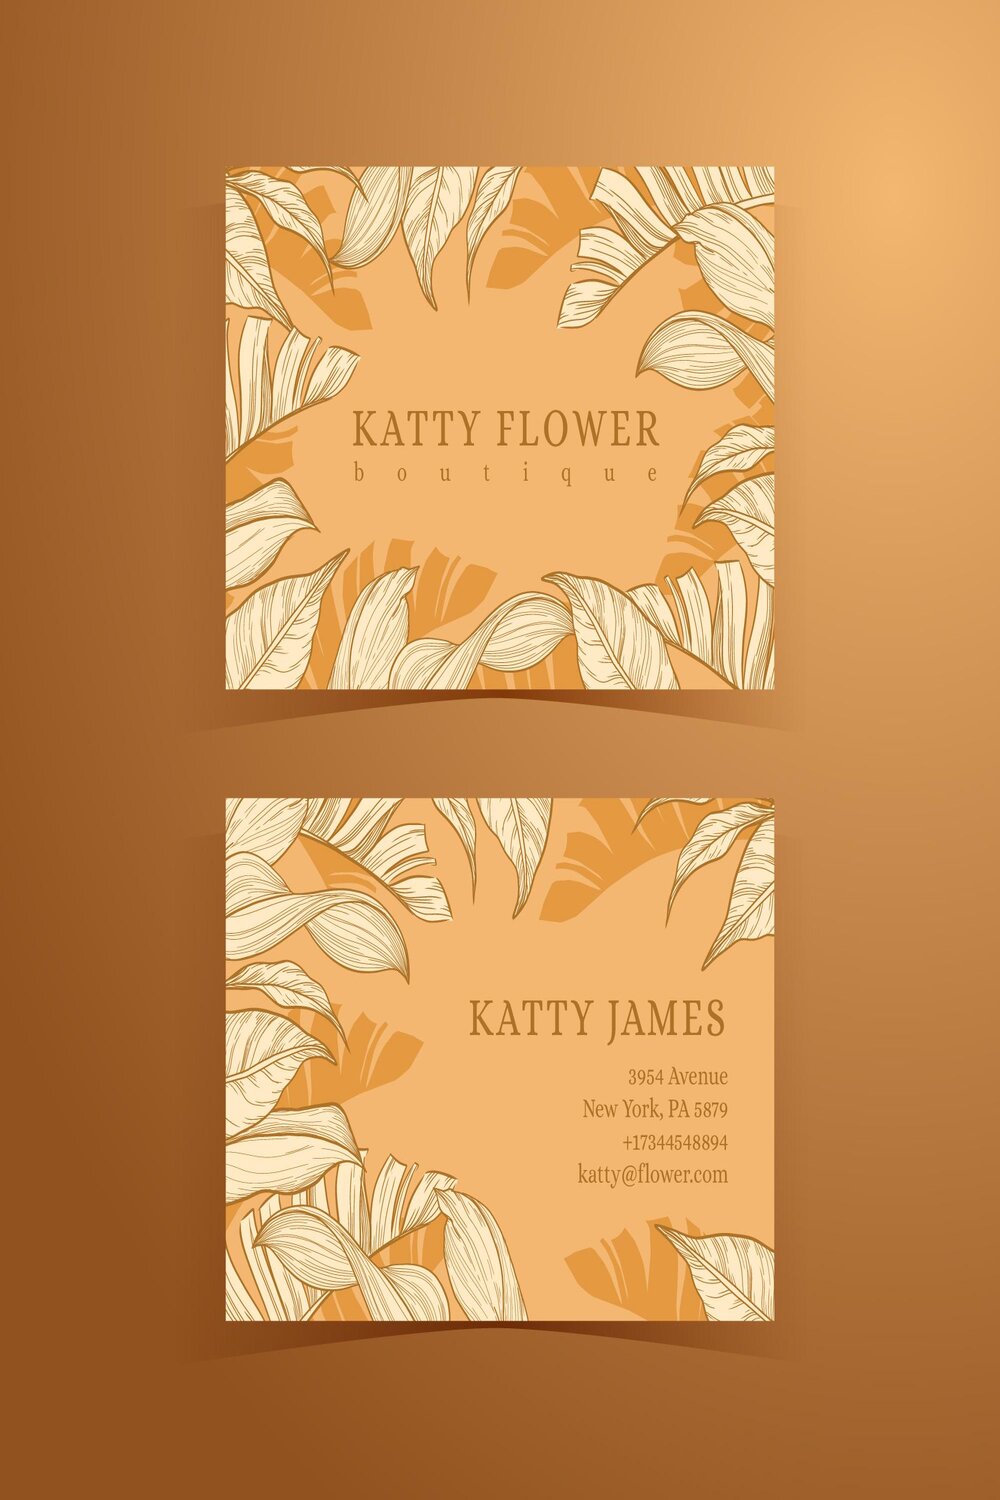 Professional Business Card with Floral Background Pinterest collage image.